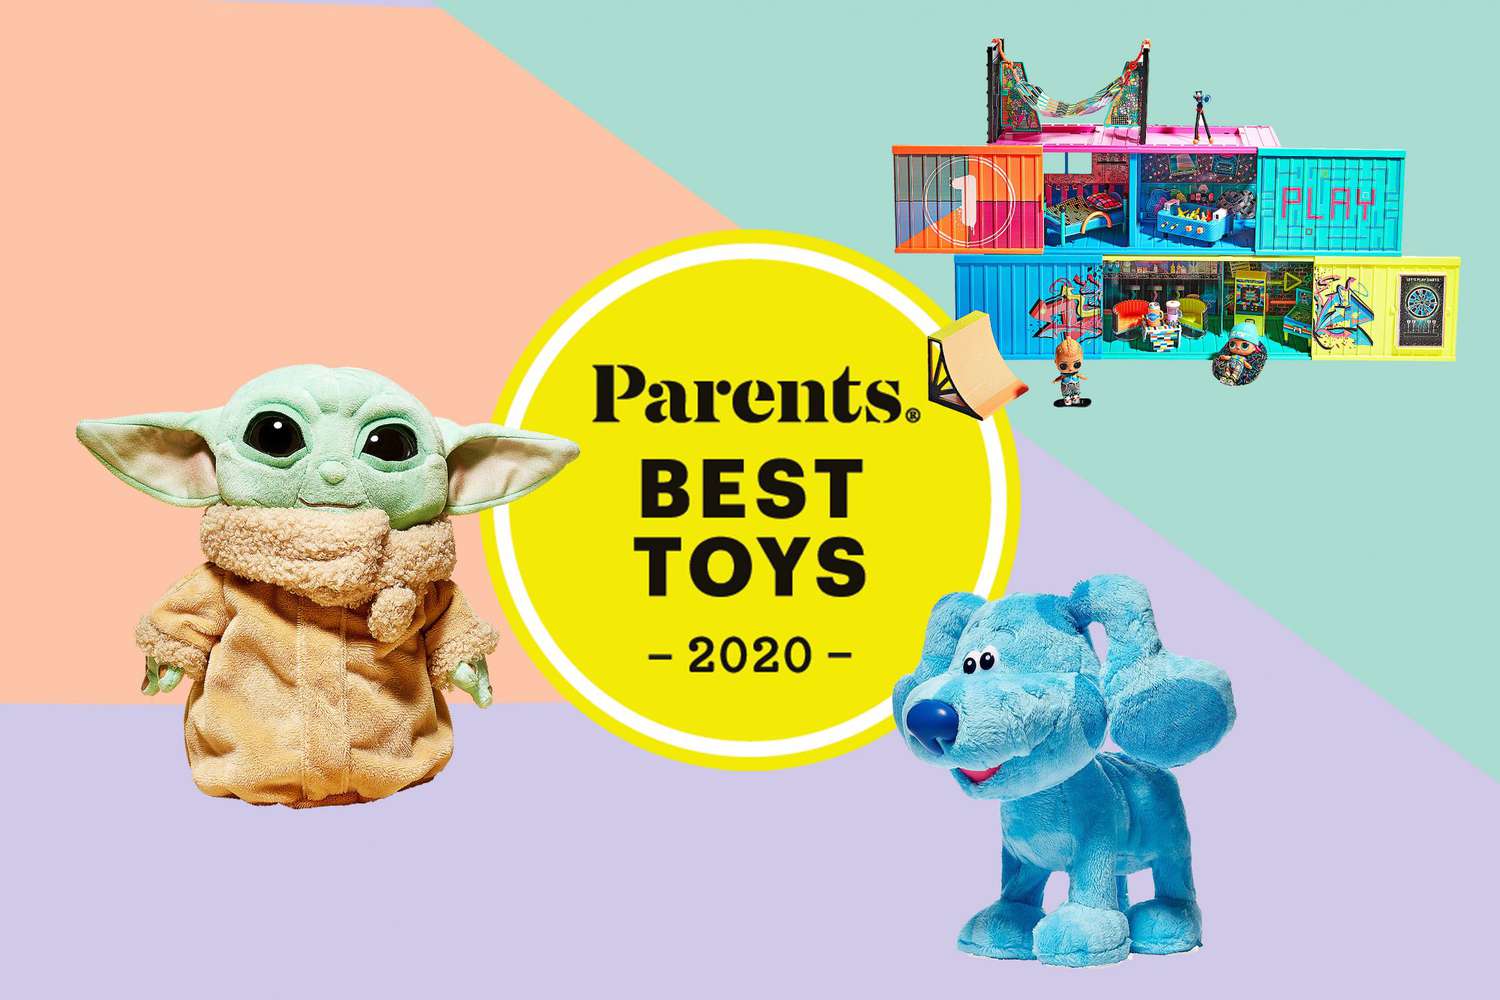 Parents Best Toys 2020 seal with stuffed blues clues plush, stuffed baby yoda plush, and LOL dolls toy set